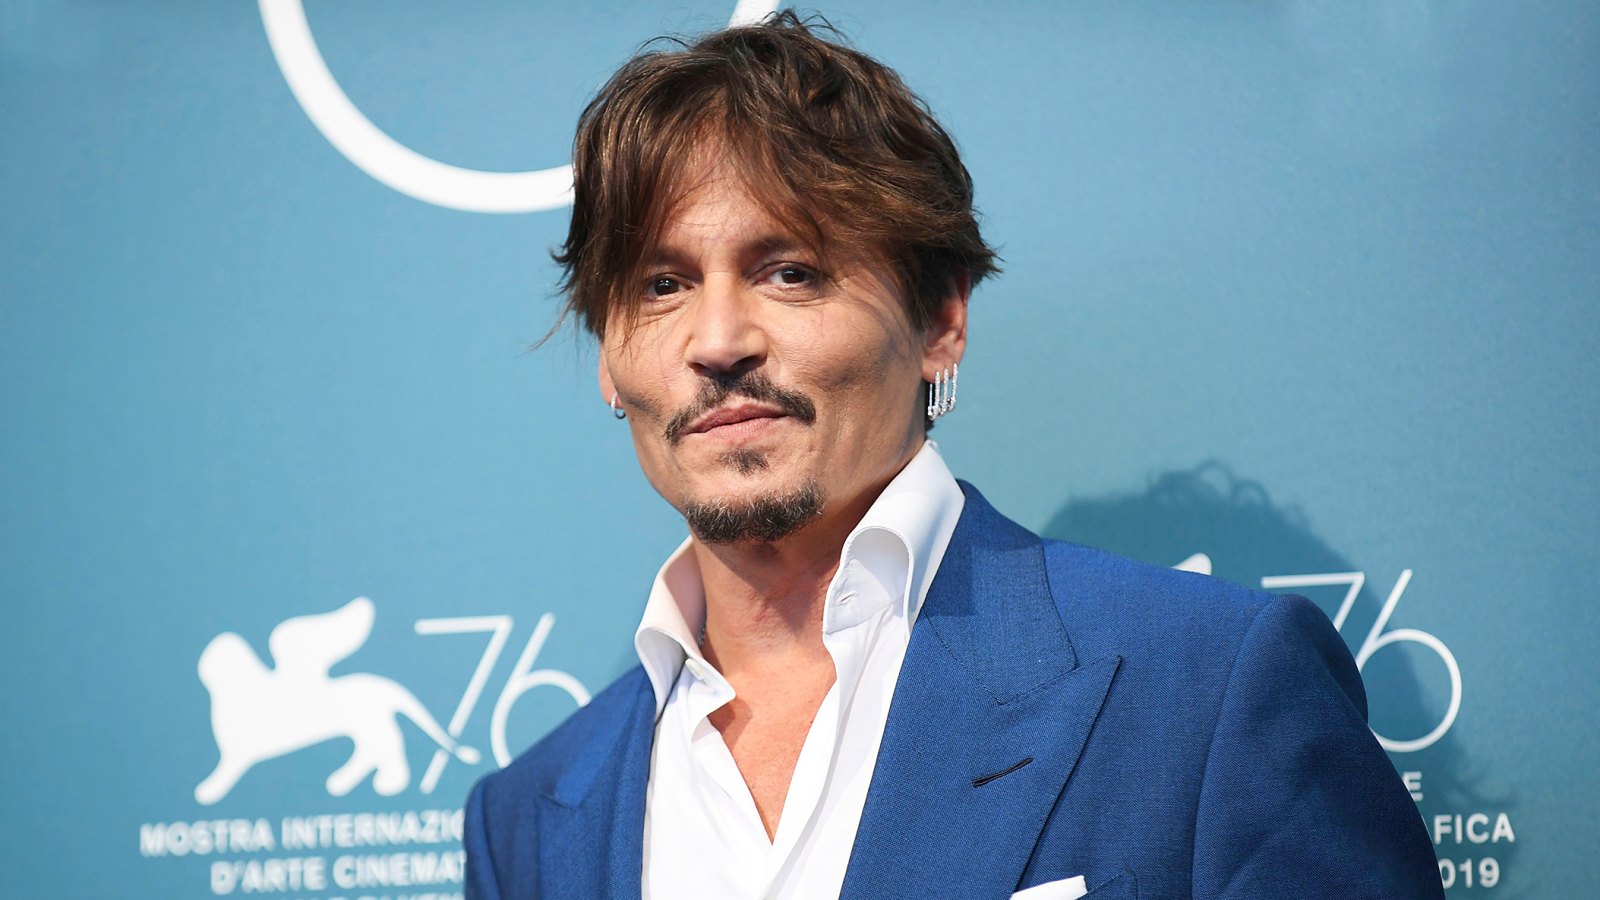 Dior Sauvage Becomes 2nd Most Popular Fragrance After Depp Wins Trial